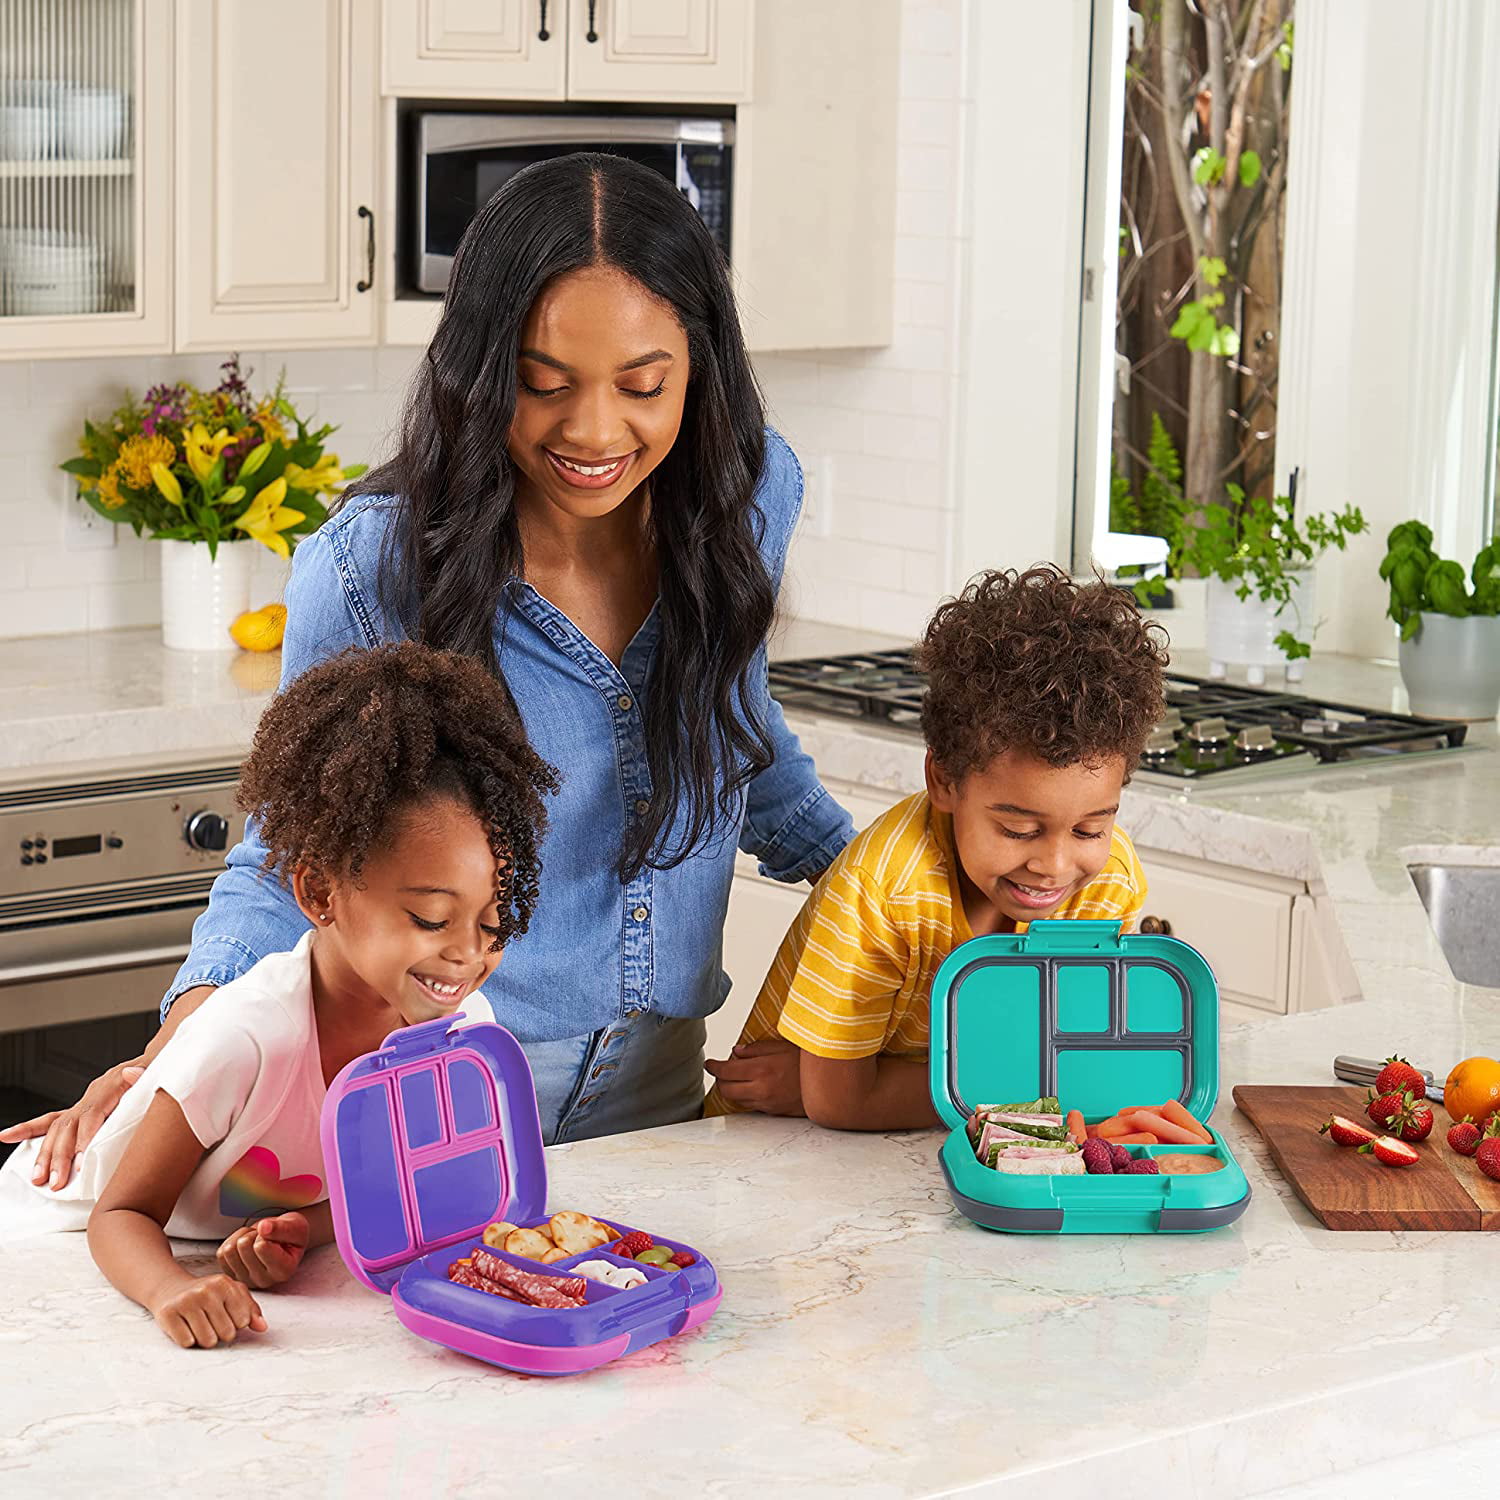  Bentgo® Kids Chill Lunch Box - Leak-Proof Bento Box with  Removable Ice Pack & 4 Compartments for On-the-Go Meals - Microwave &  Dishwasher Safe, Patented Design, & 2-Year Warranty (Fuchsia/Teal): Home